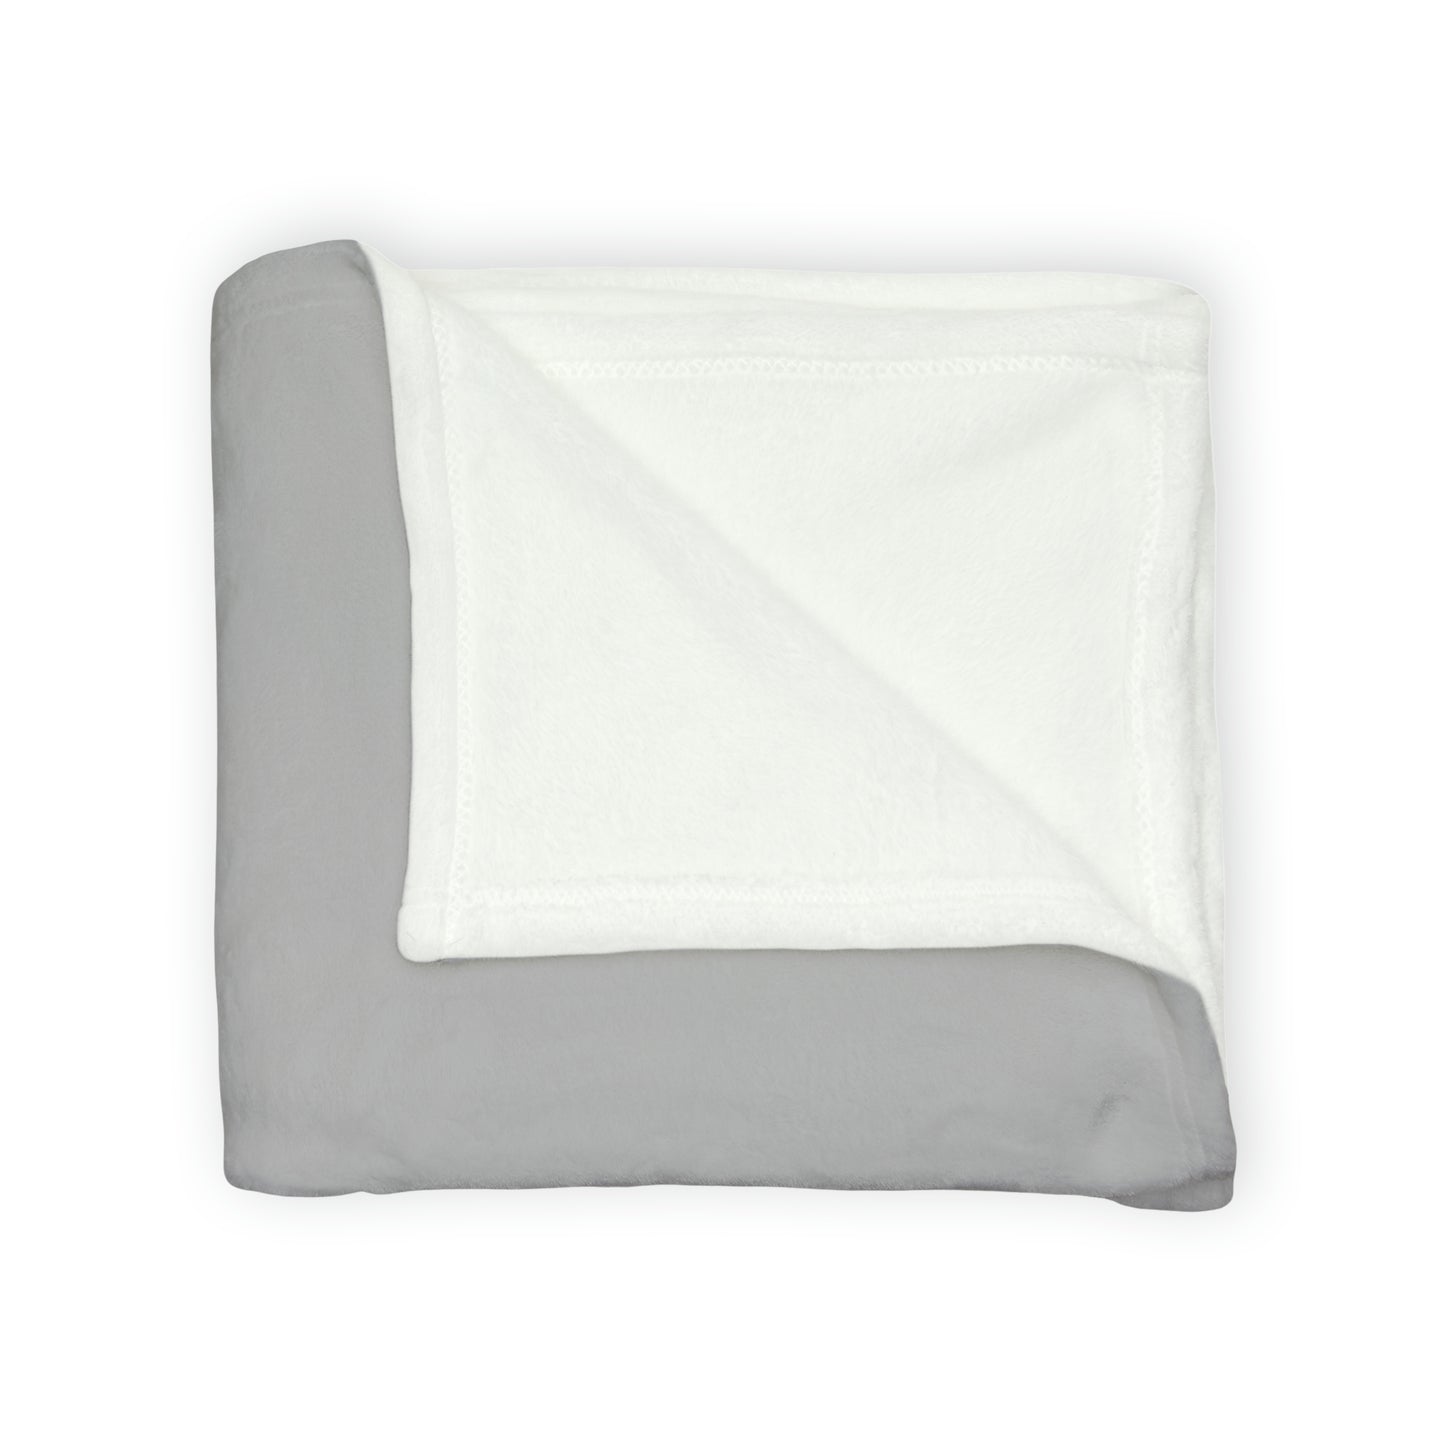 Soft Polyester Blanket - Wdsf Track 2